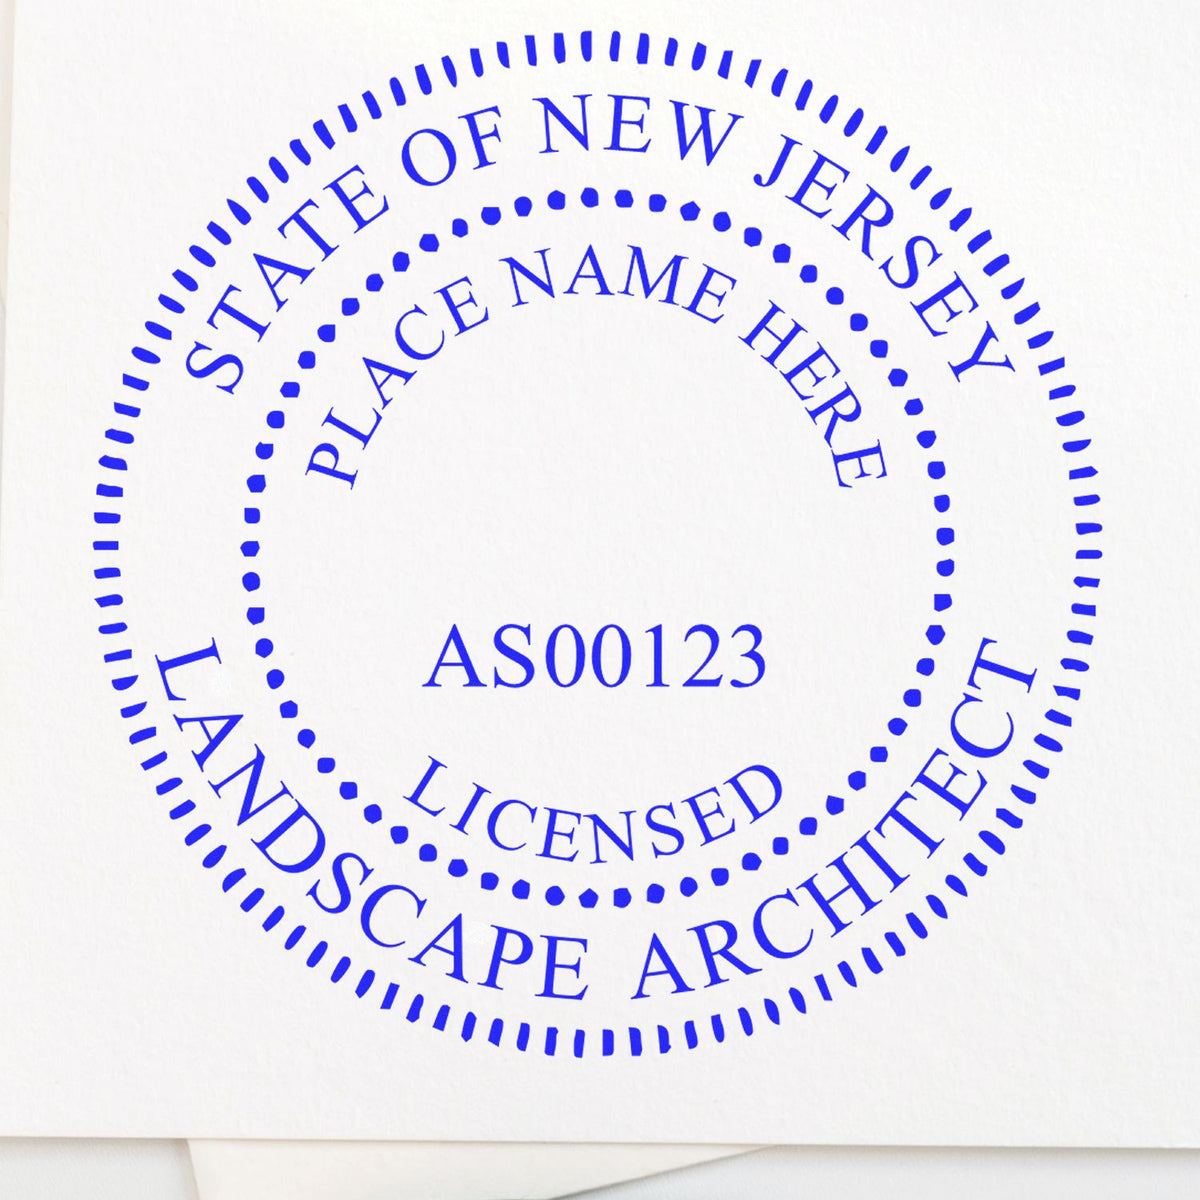 The Slim Pre-Inked New Jersey Landscape Architect Seal Stamp stamp impression comes to life with a crisp, detailed photo on paper - showcasing true professional quality.